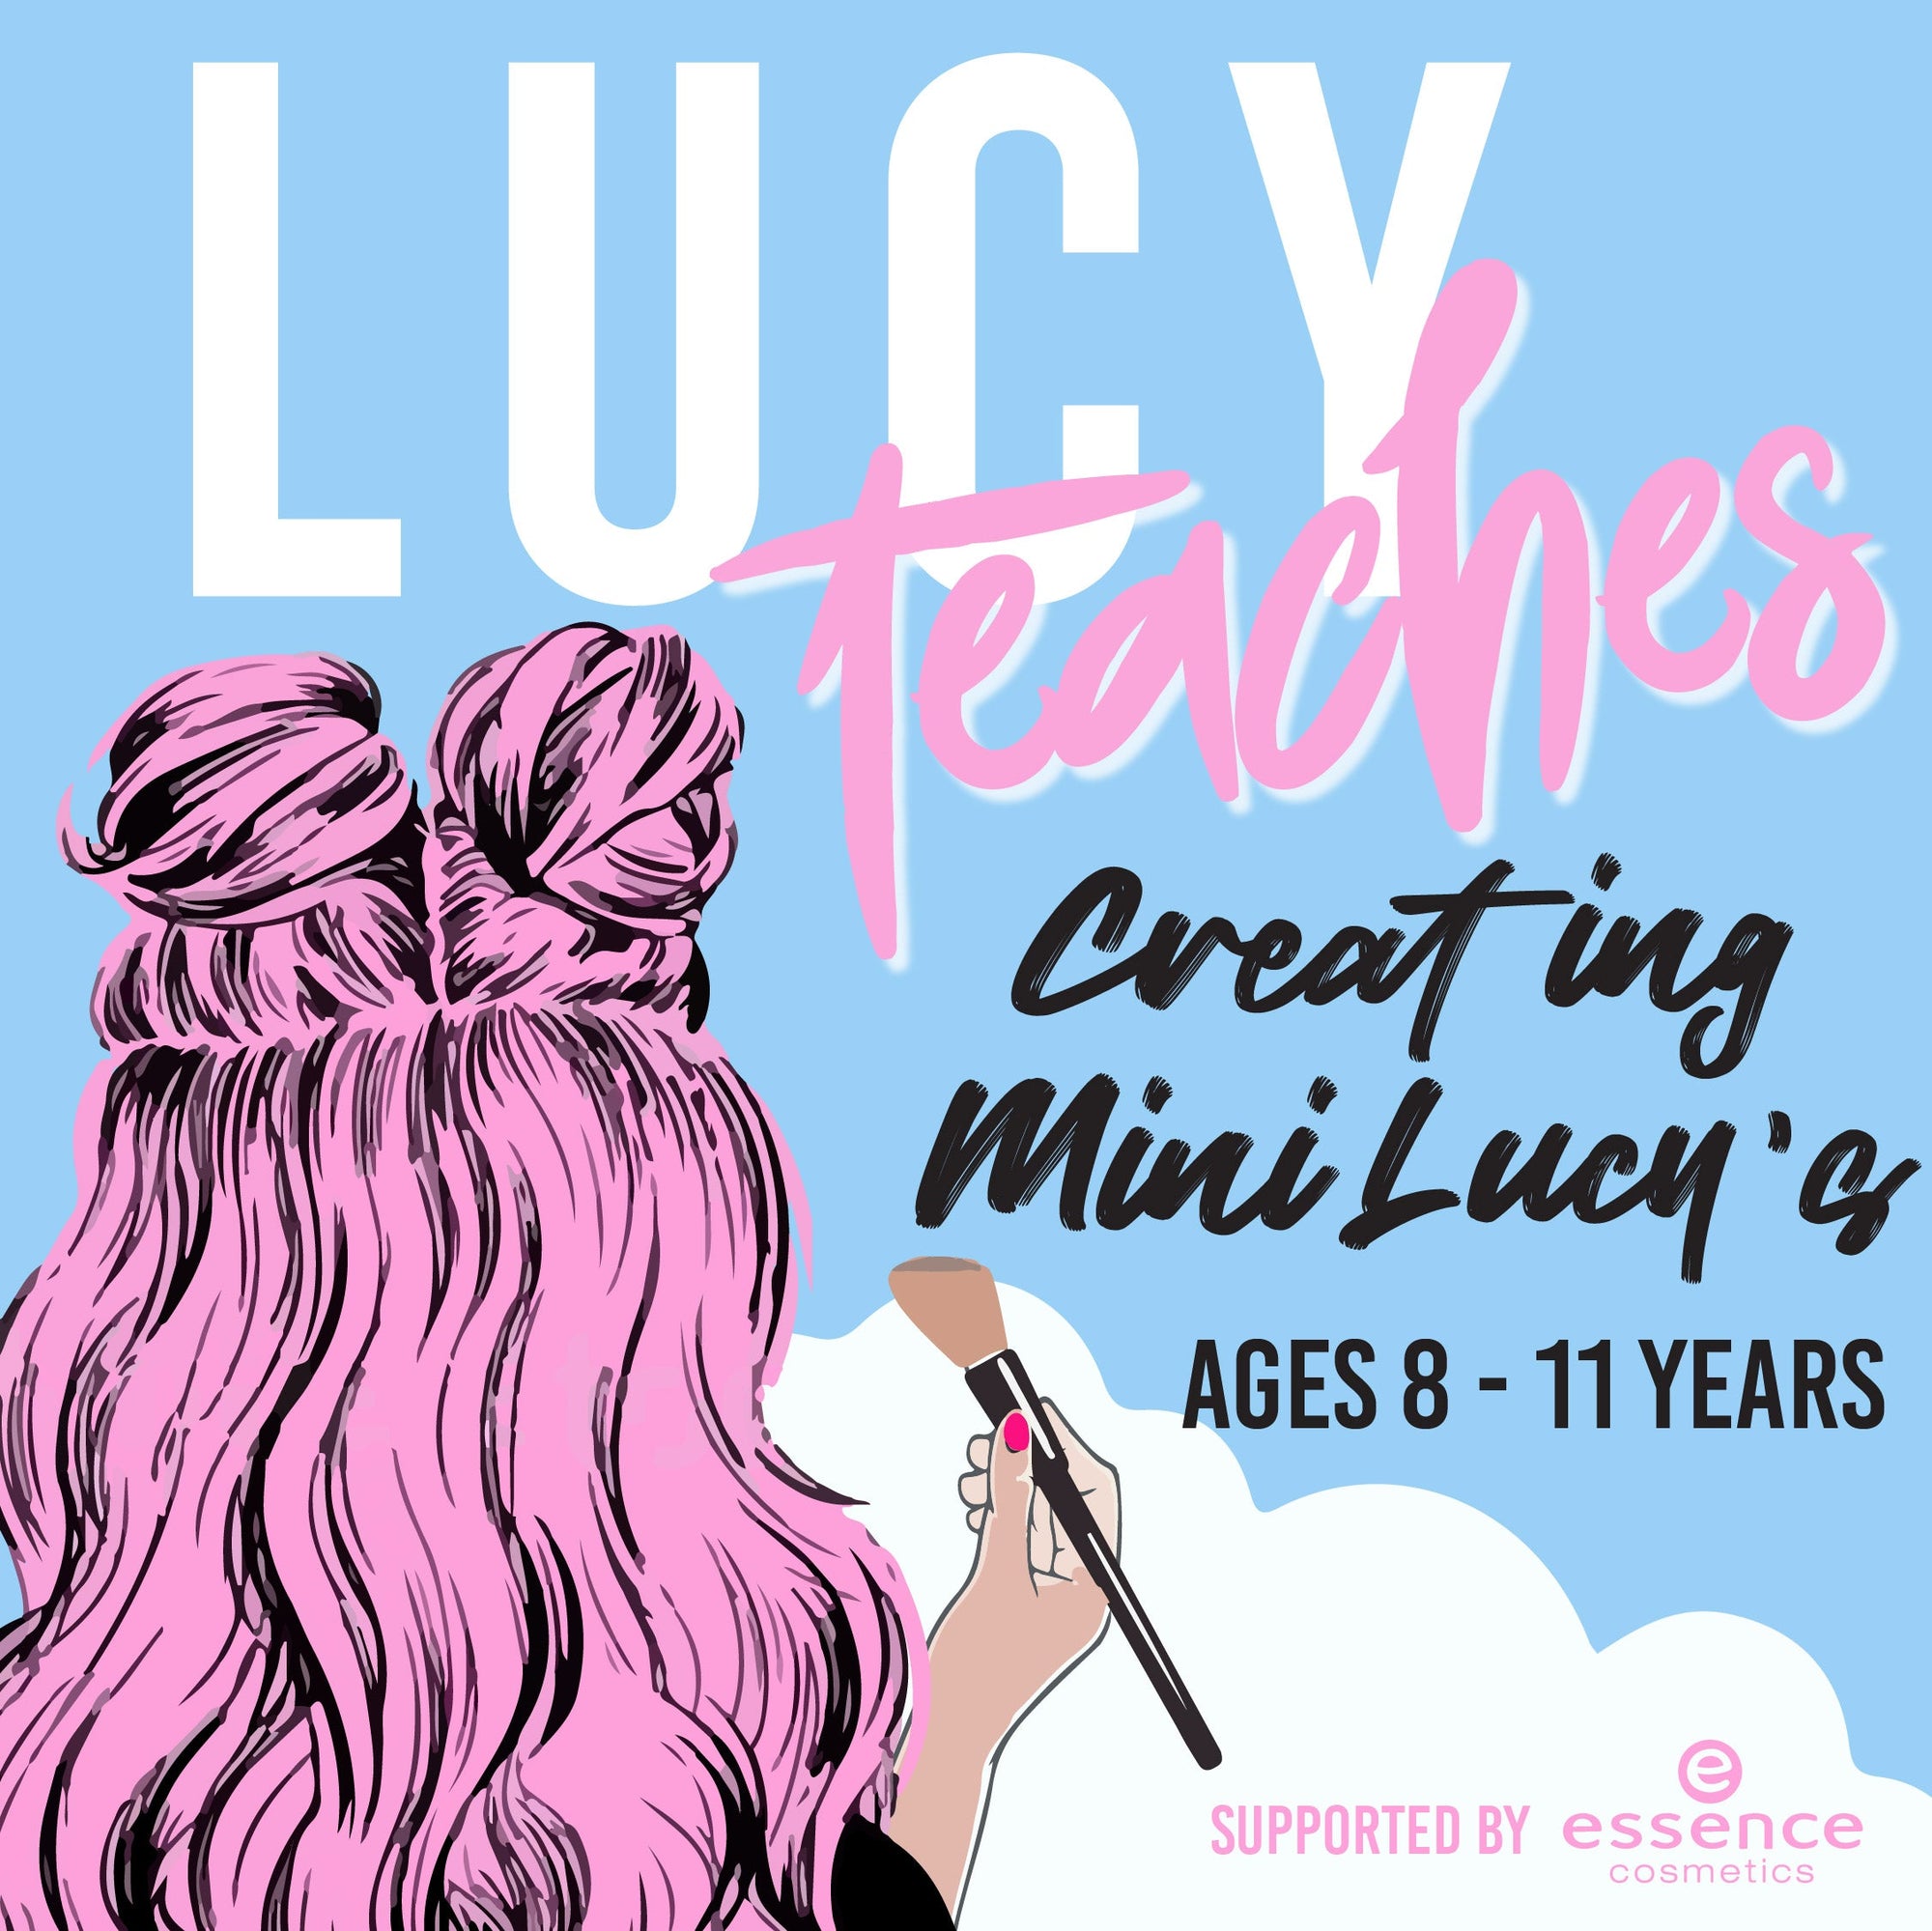 Lucy Teaches: Children's Beauty Workshop for Beginners (Mini - 8-11 Years Old) | May